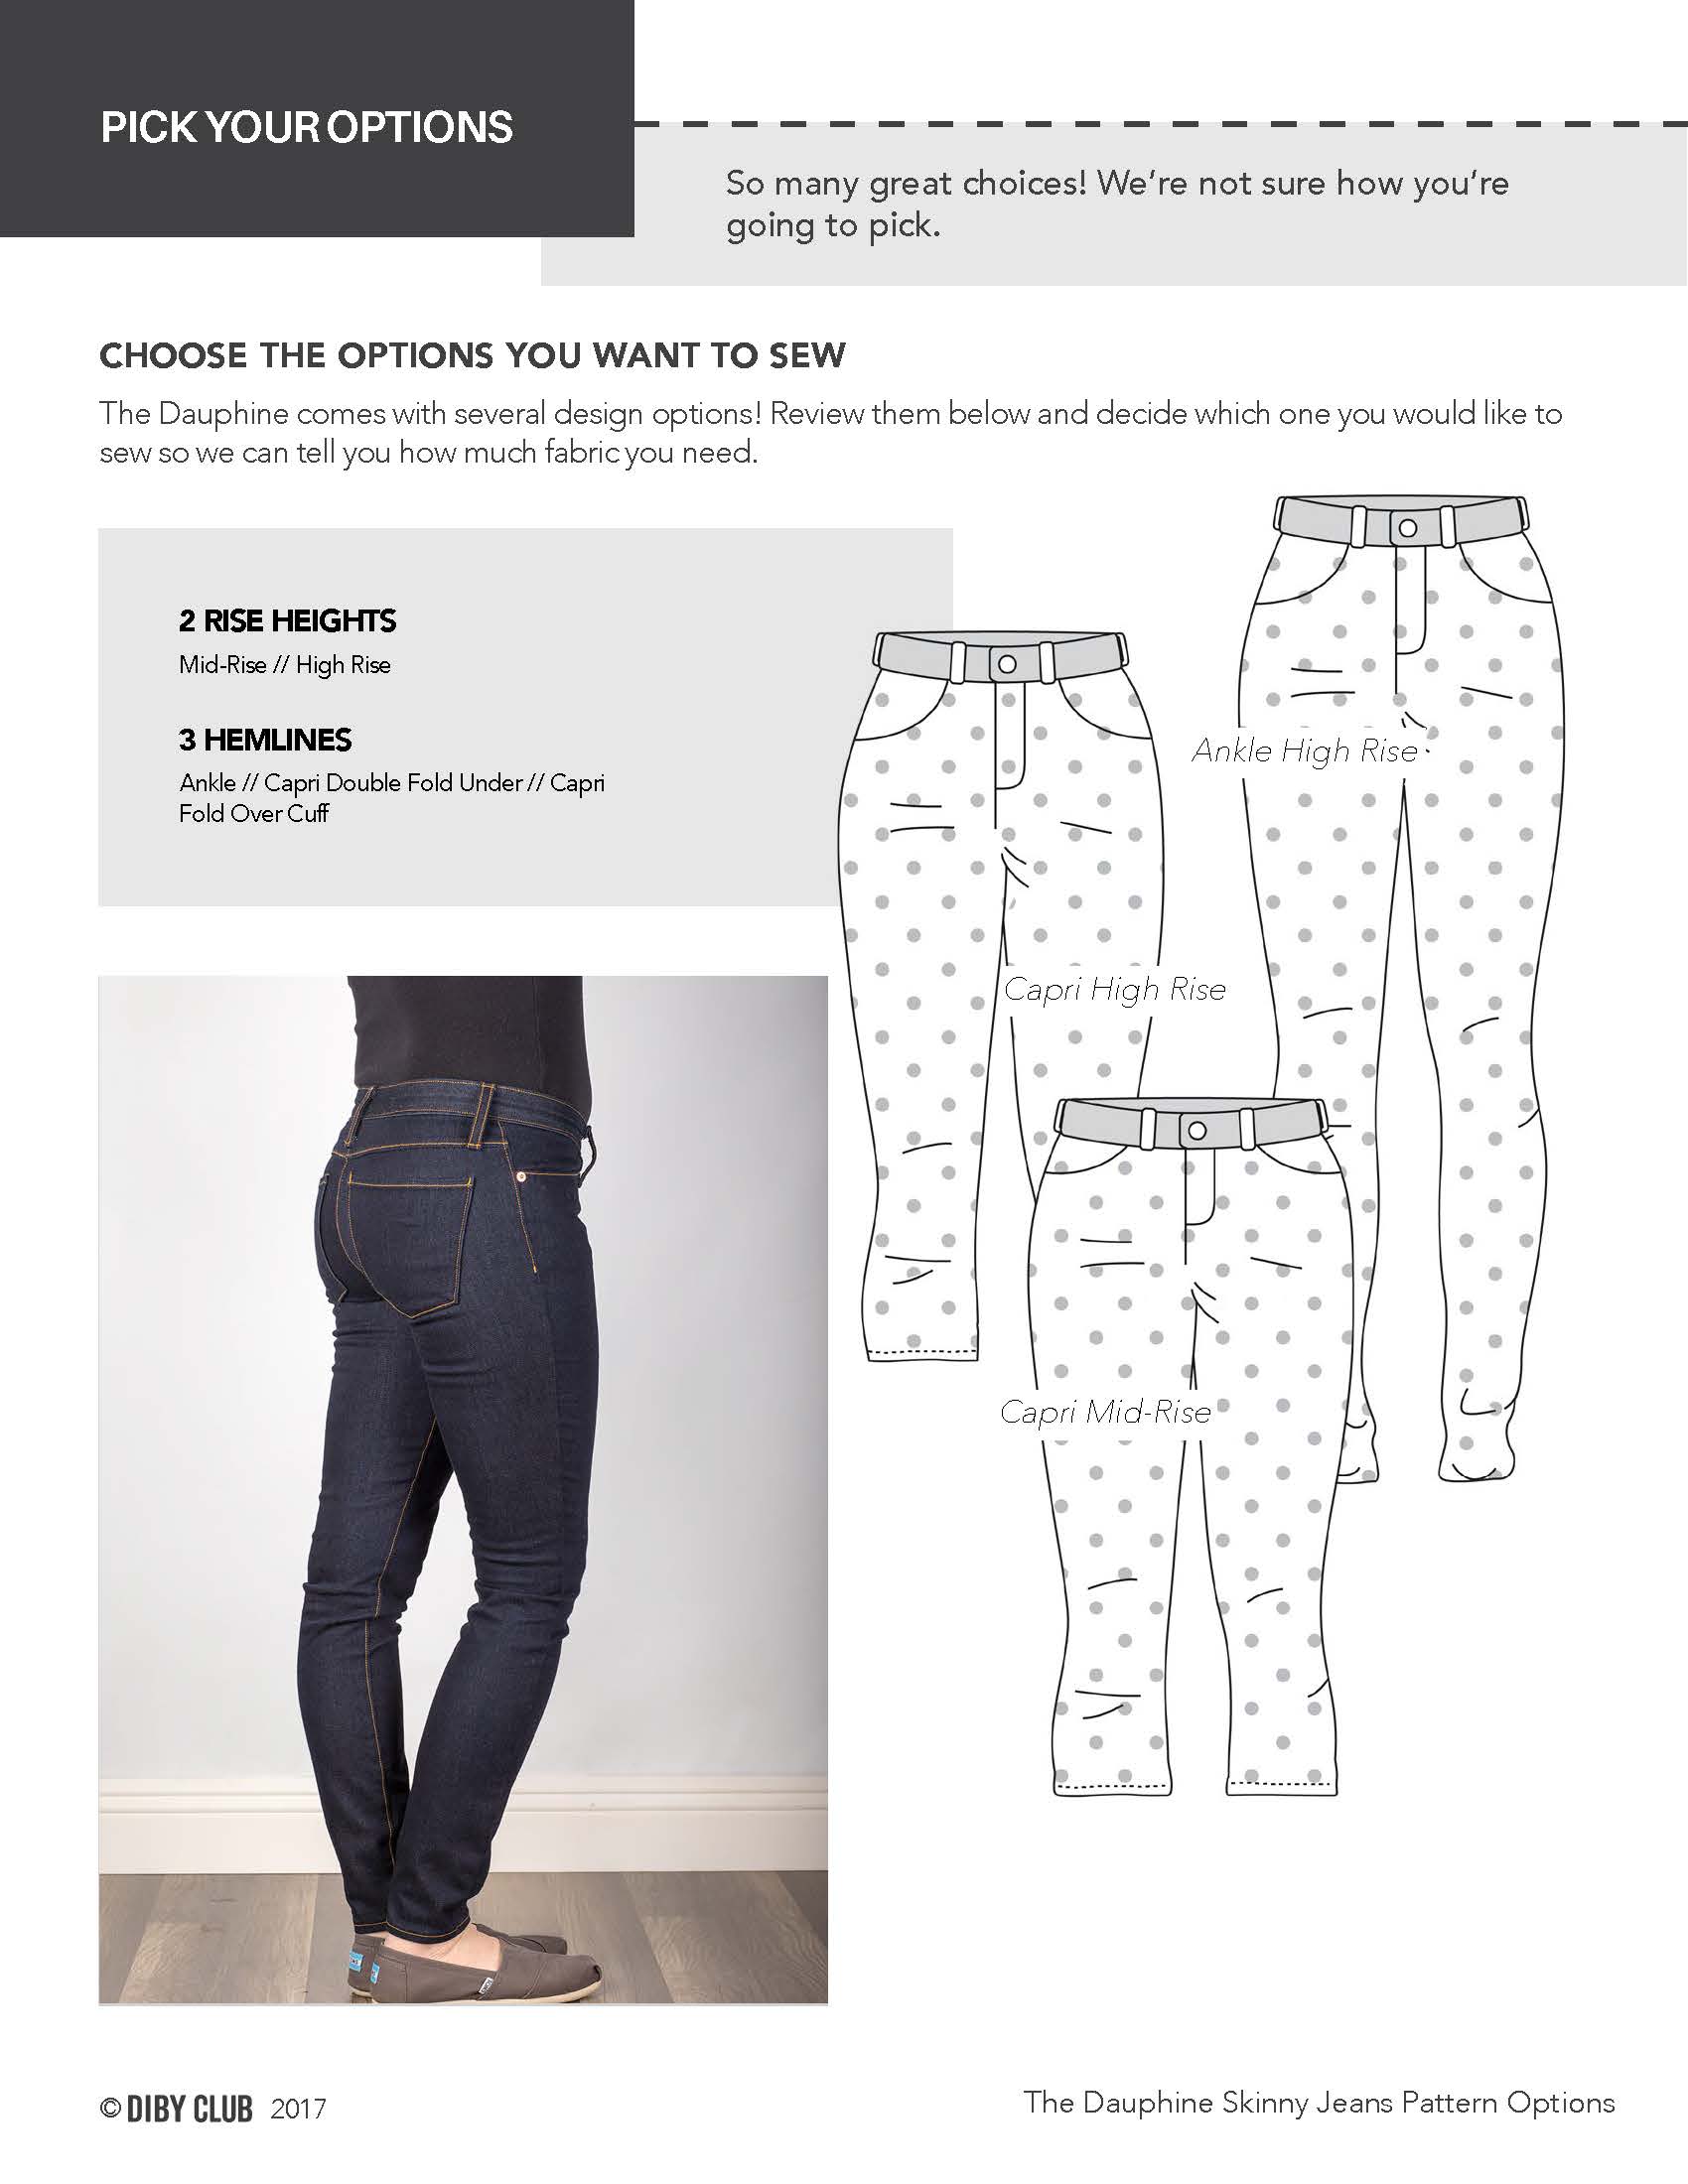 The Dauphine Skinny Jeans Pattern Options